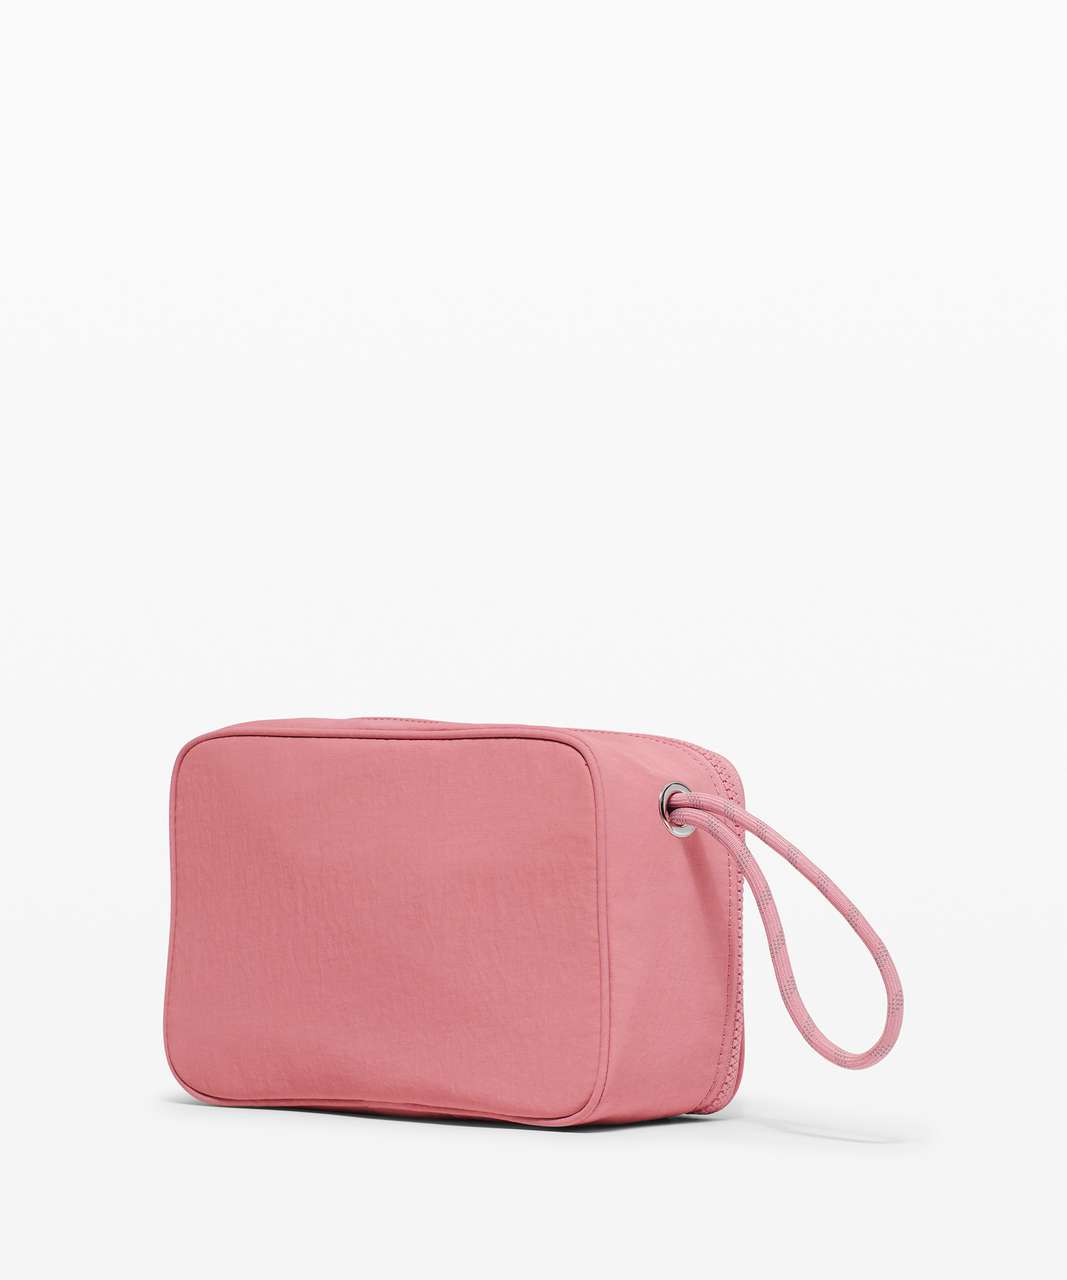 Lululemon Small Things Count Kit *4L - Deco Pink